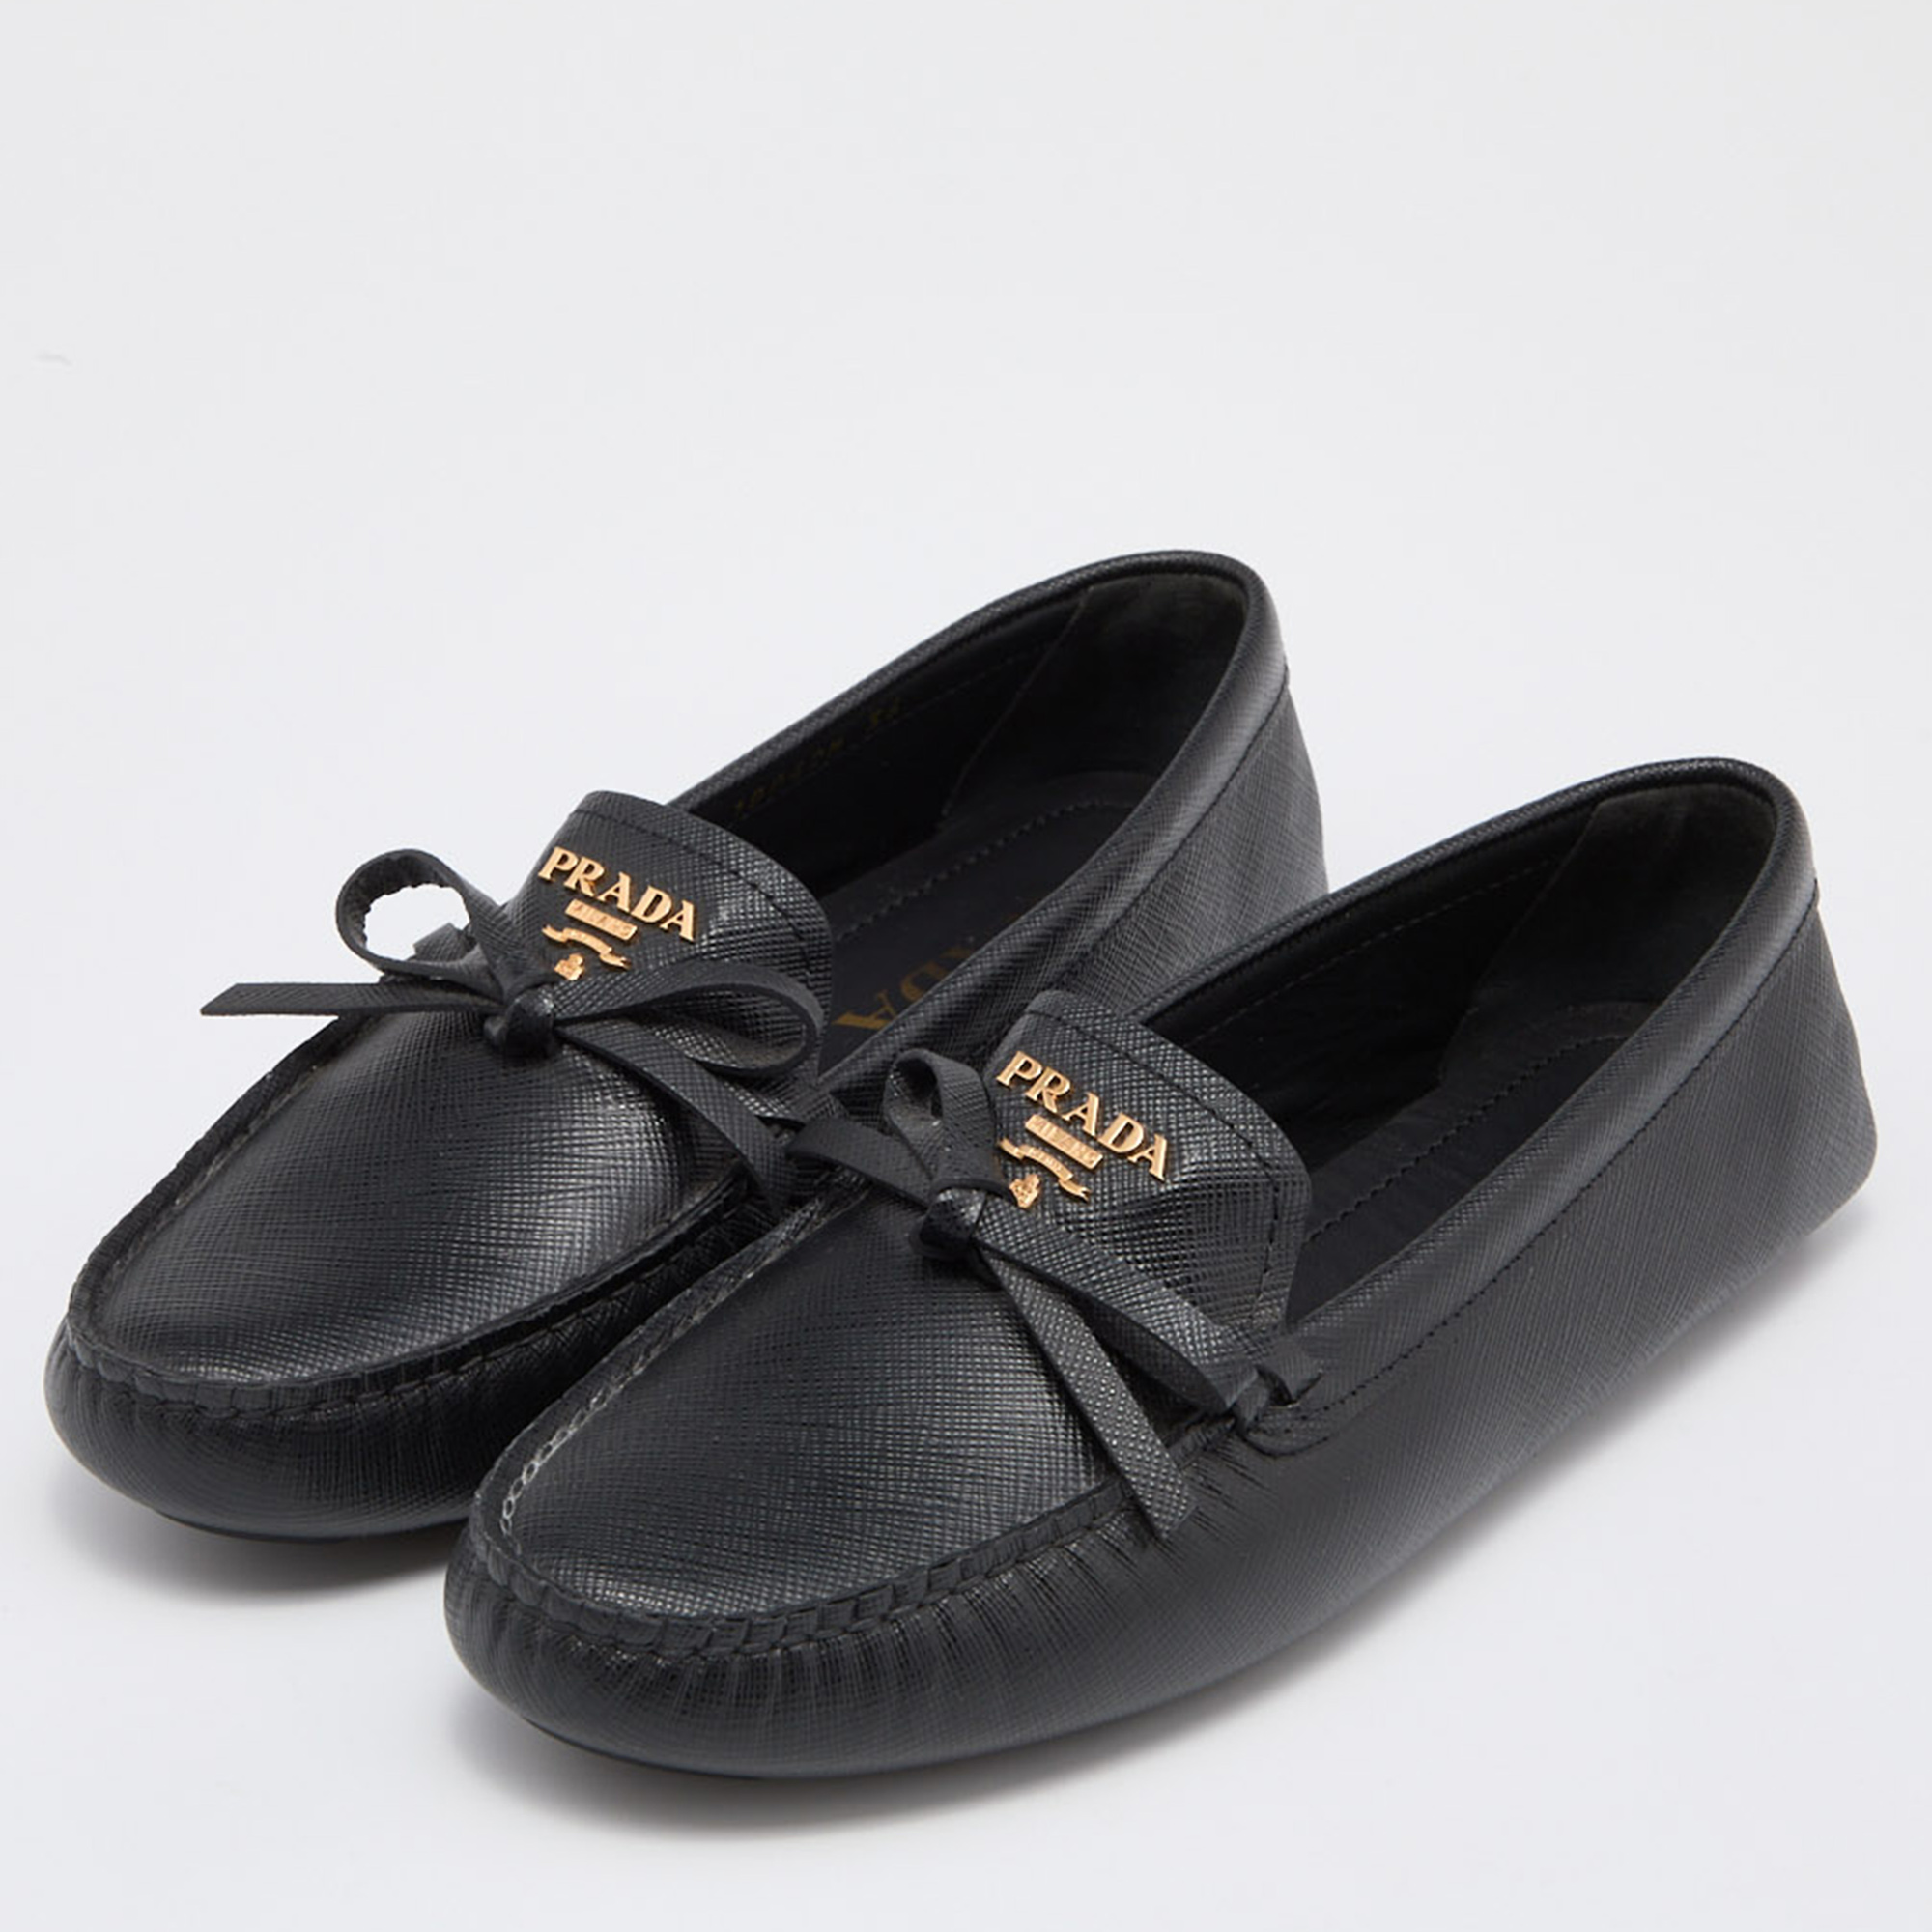 

Prada Black Saffiano Leather Bow Detail Loafers Size